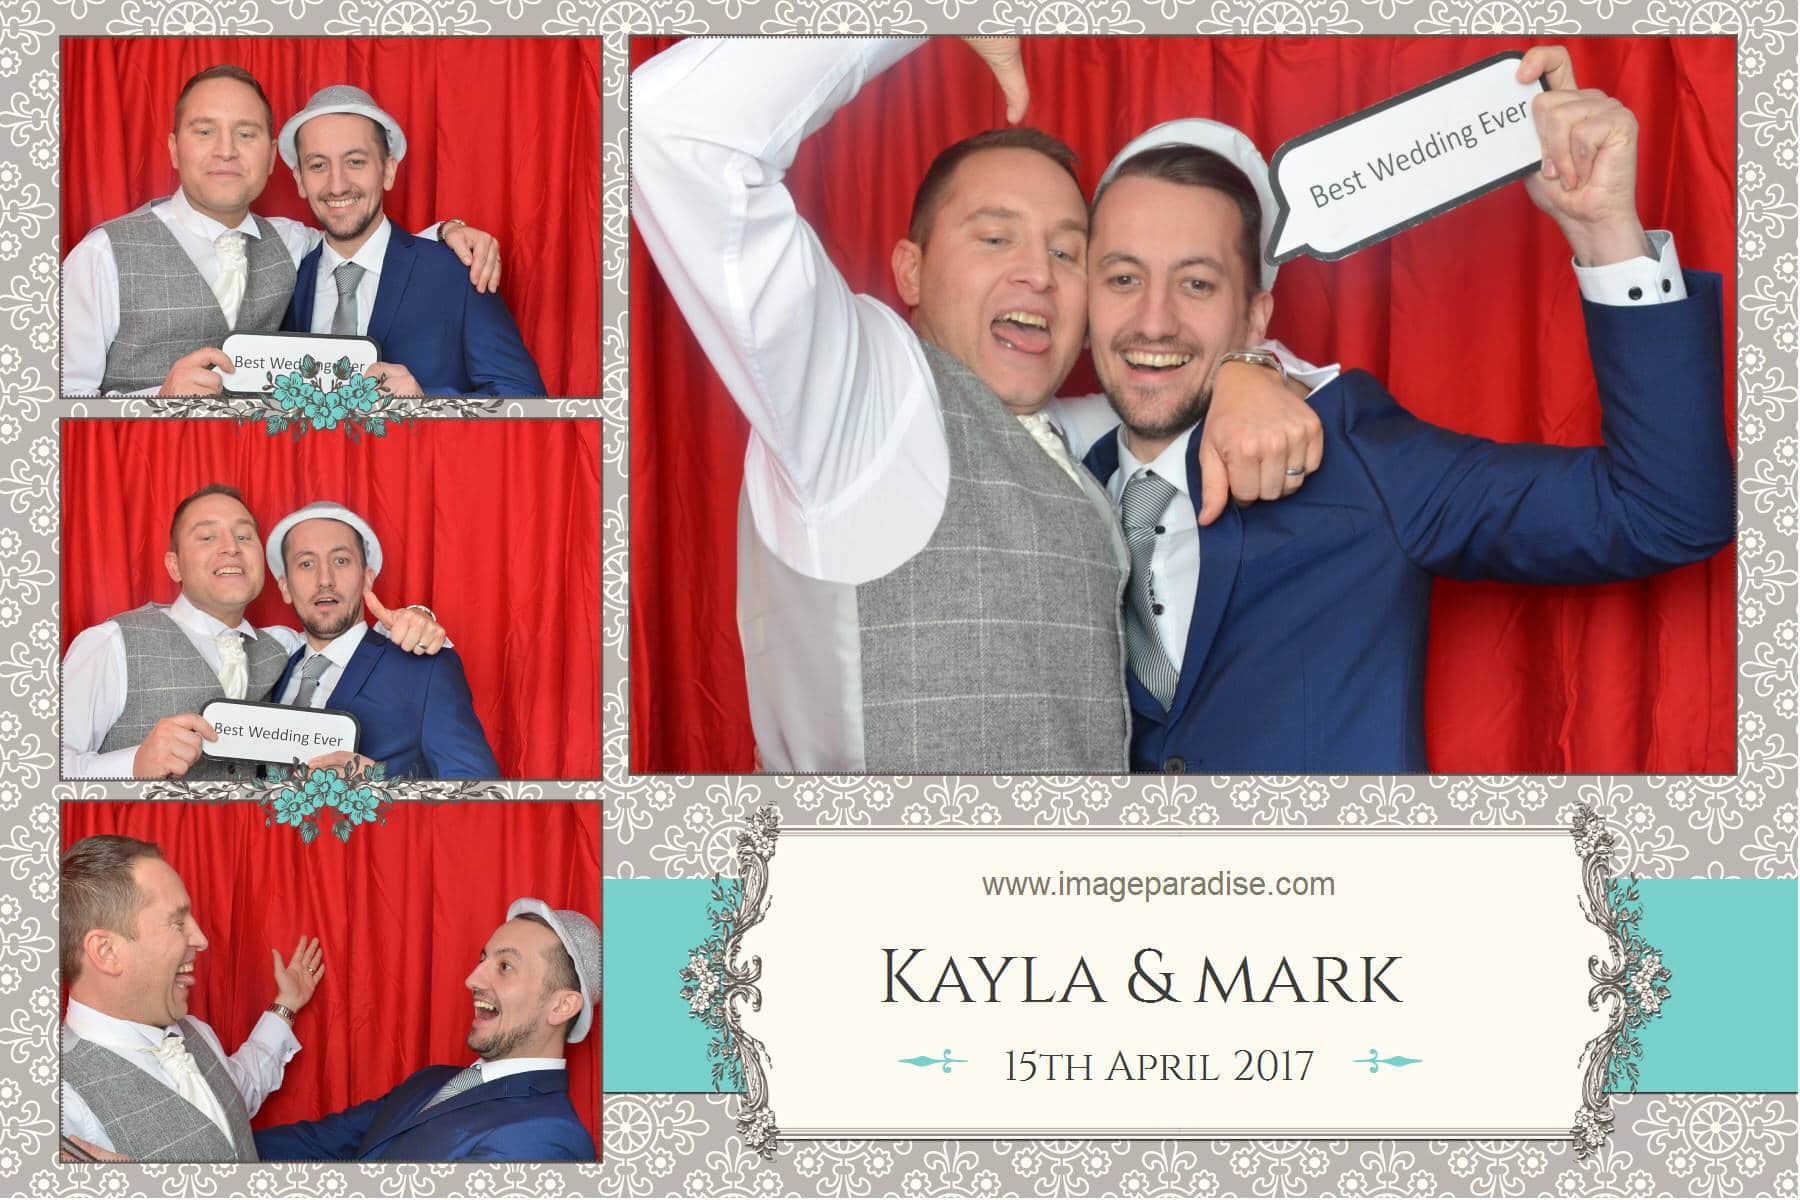 Messing about in the photo booth